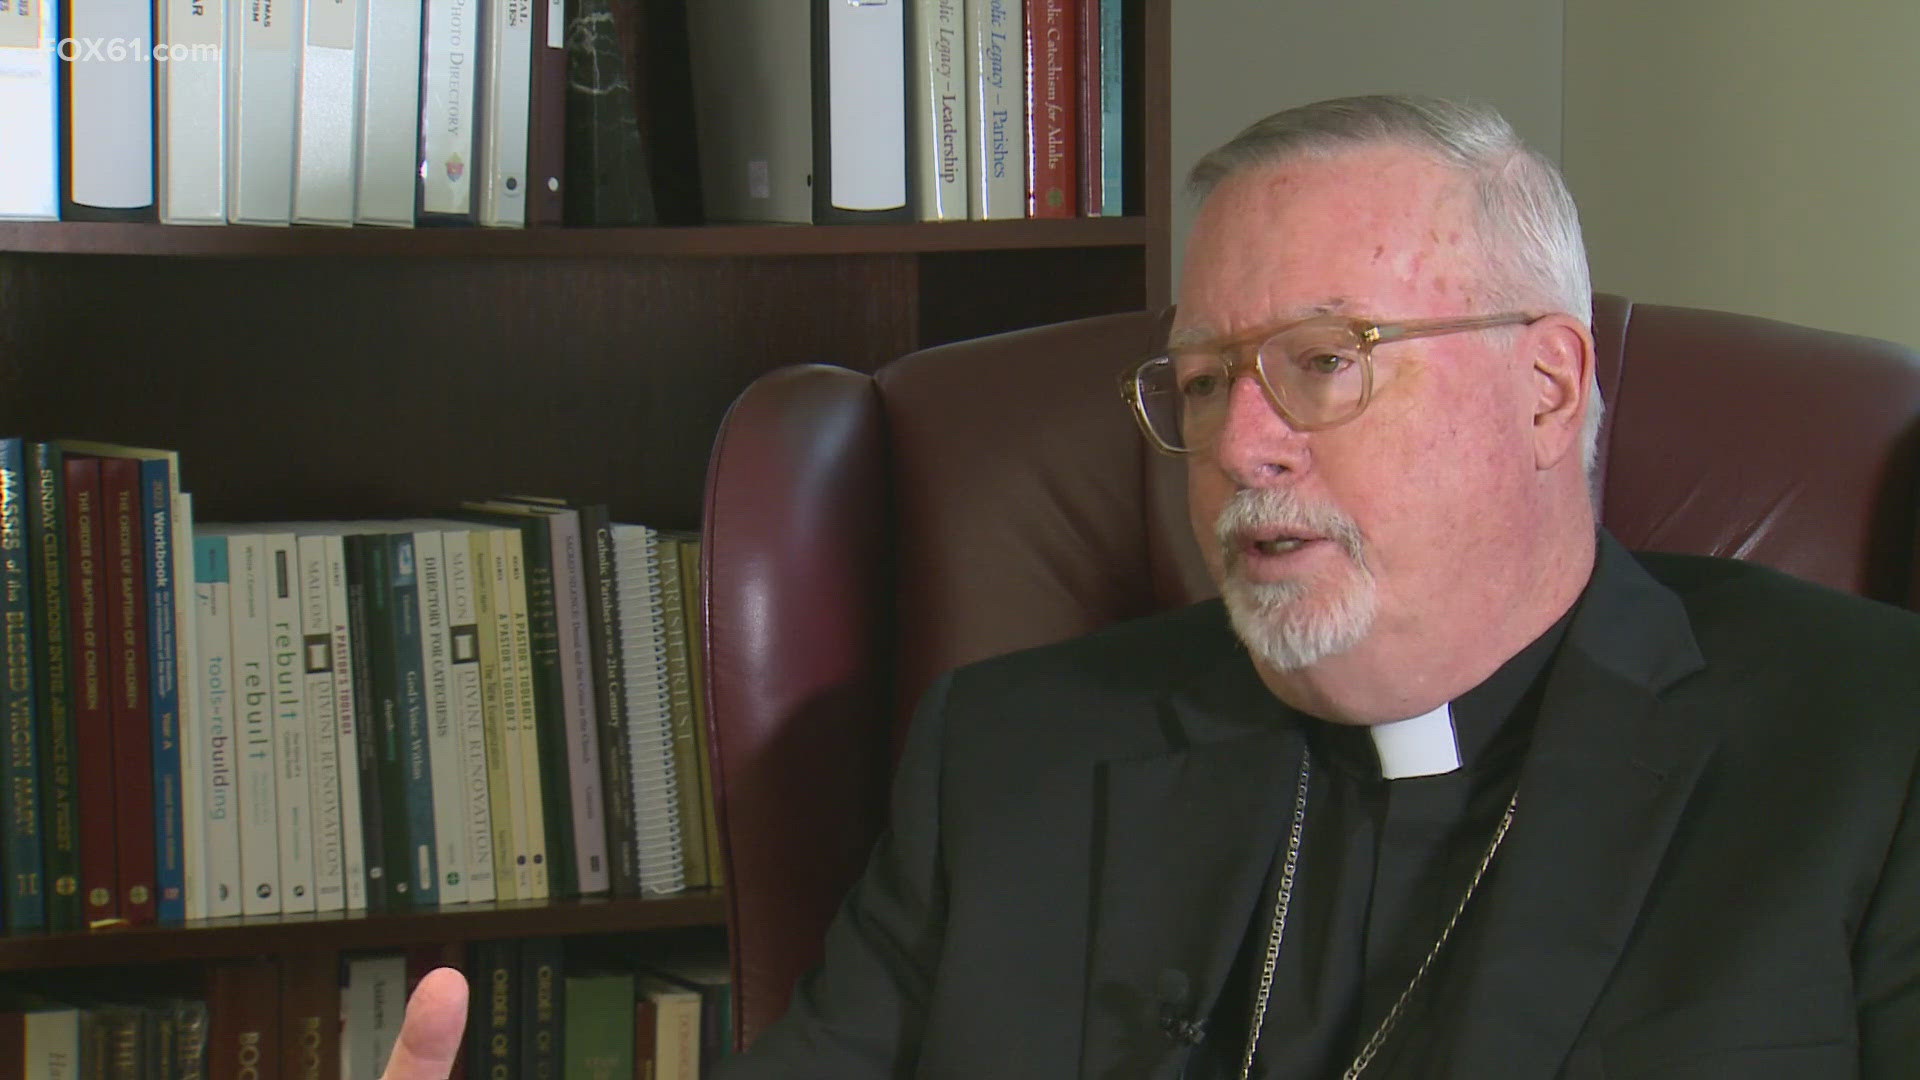 After former Archbishop Leonard Blair stepped aside earlier this month, Archbishop Christopher Coyne has filled the role. He spoke on Friday with FOX61's Matt Caron.